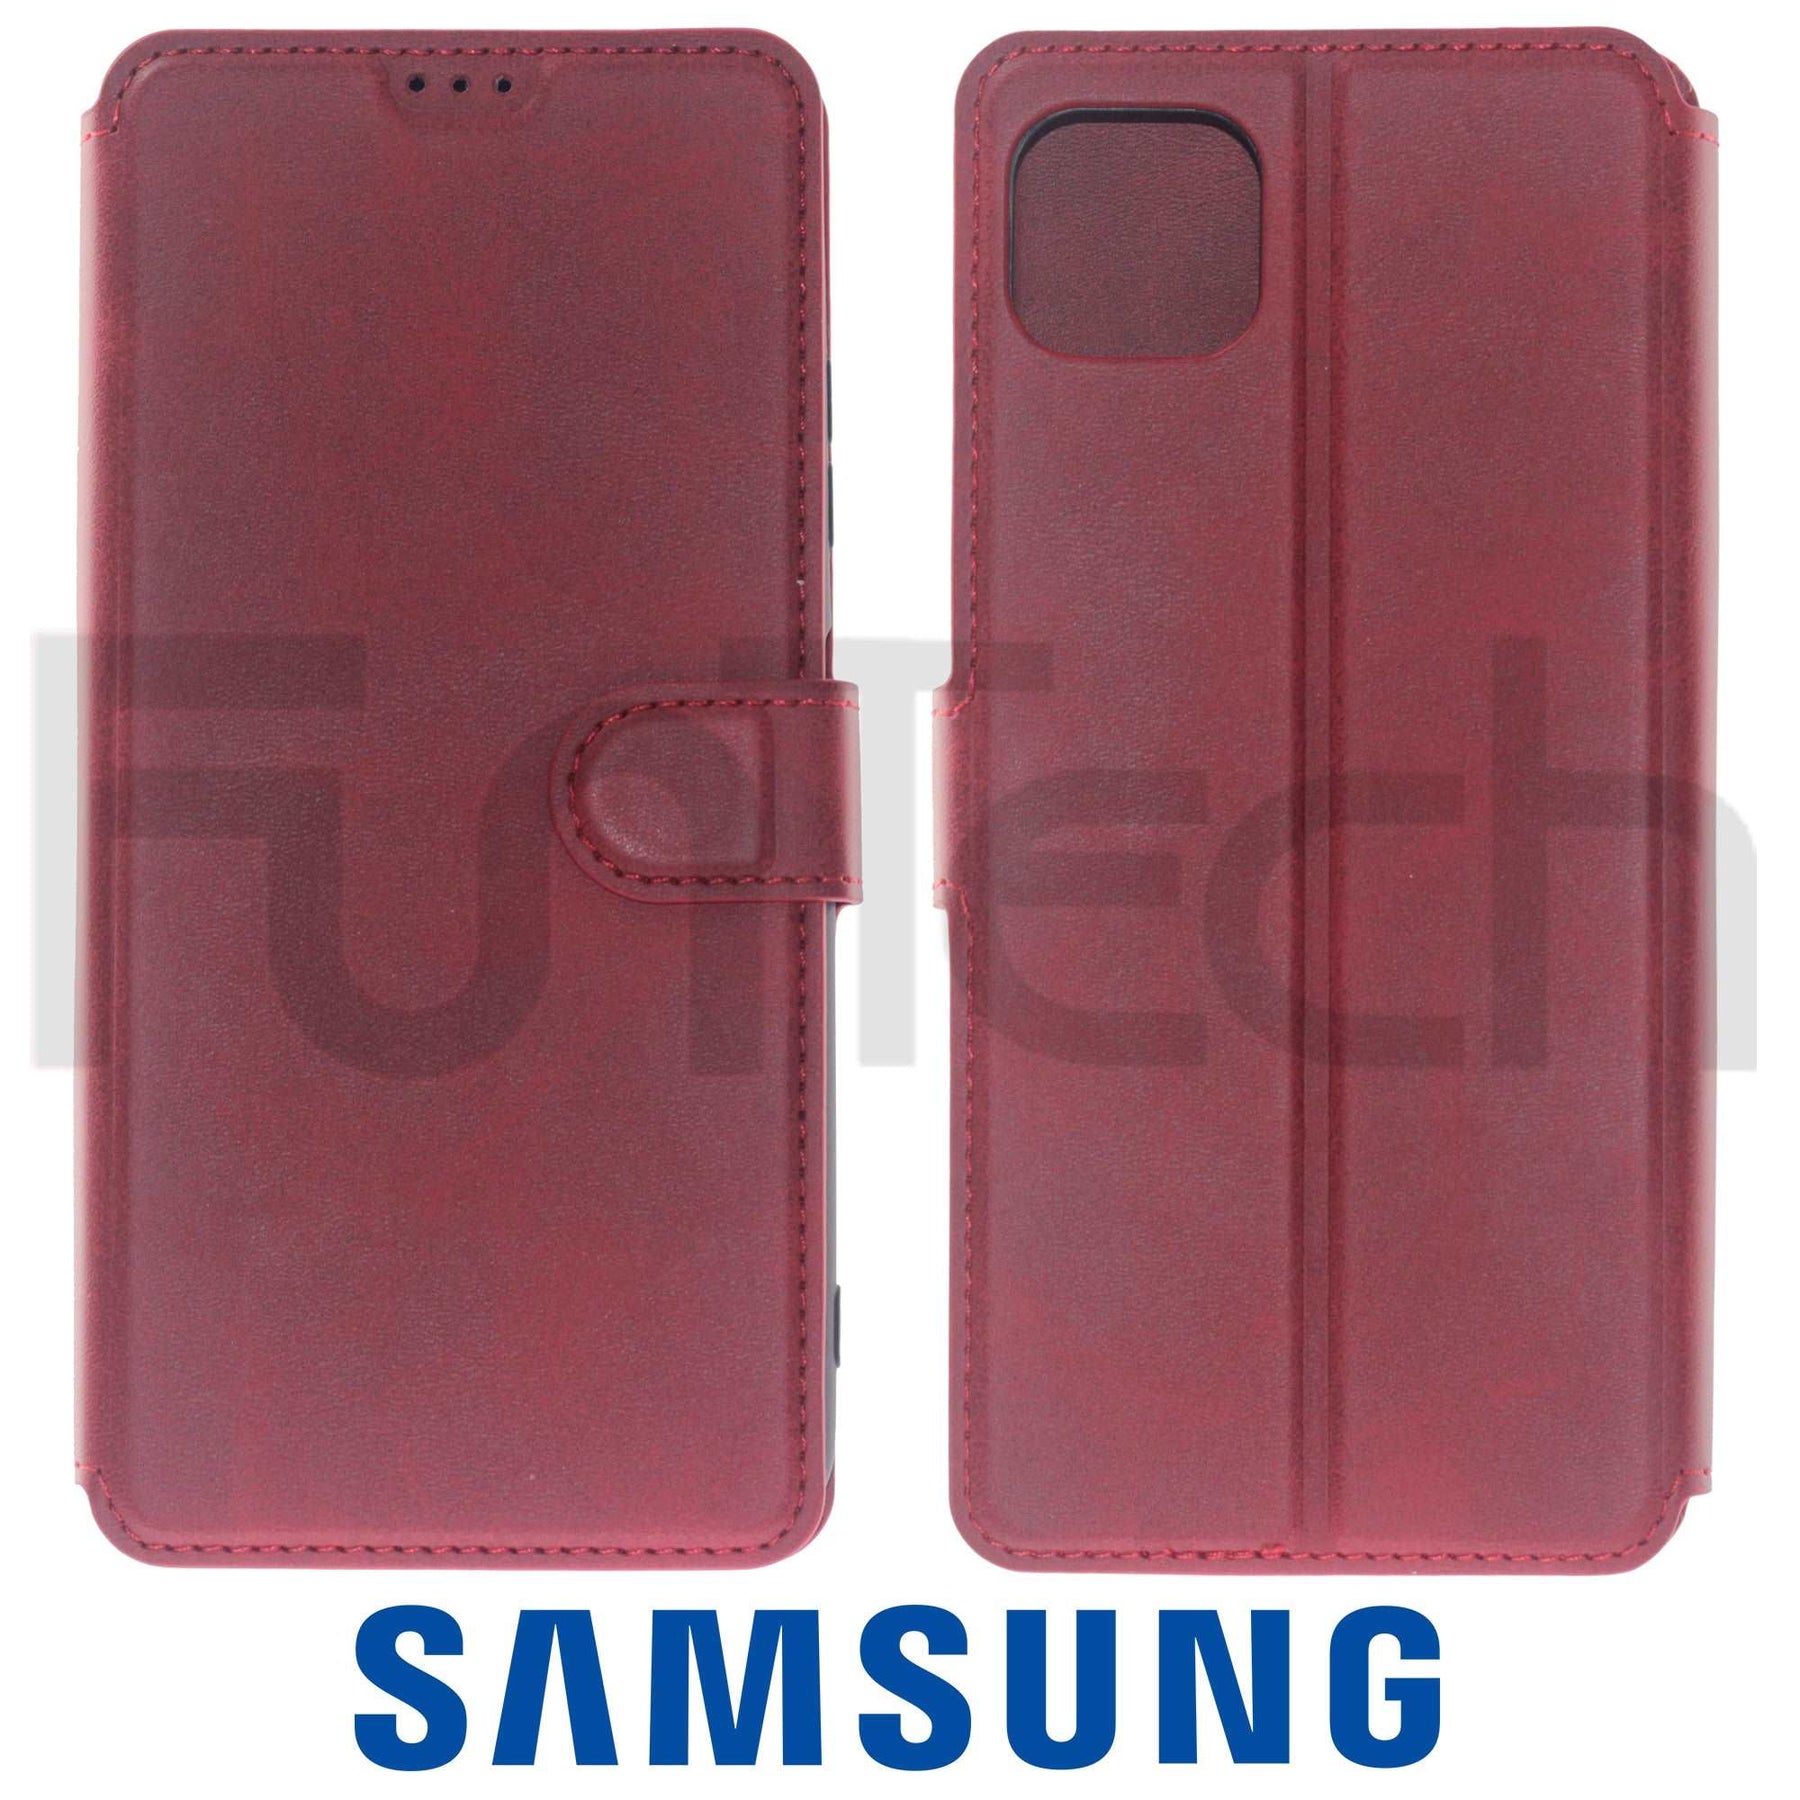 Samsung A22 5G, Leather Wallet Case, Color Red.